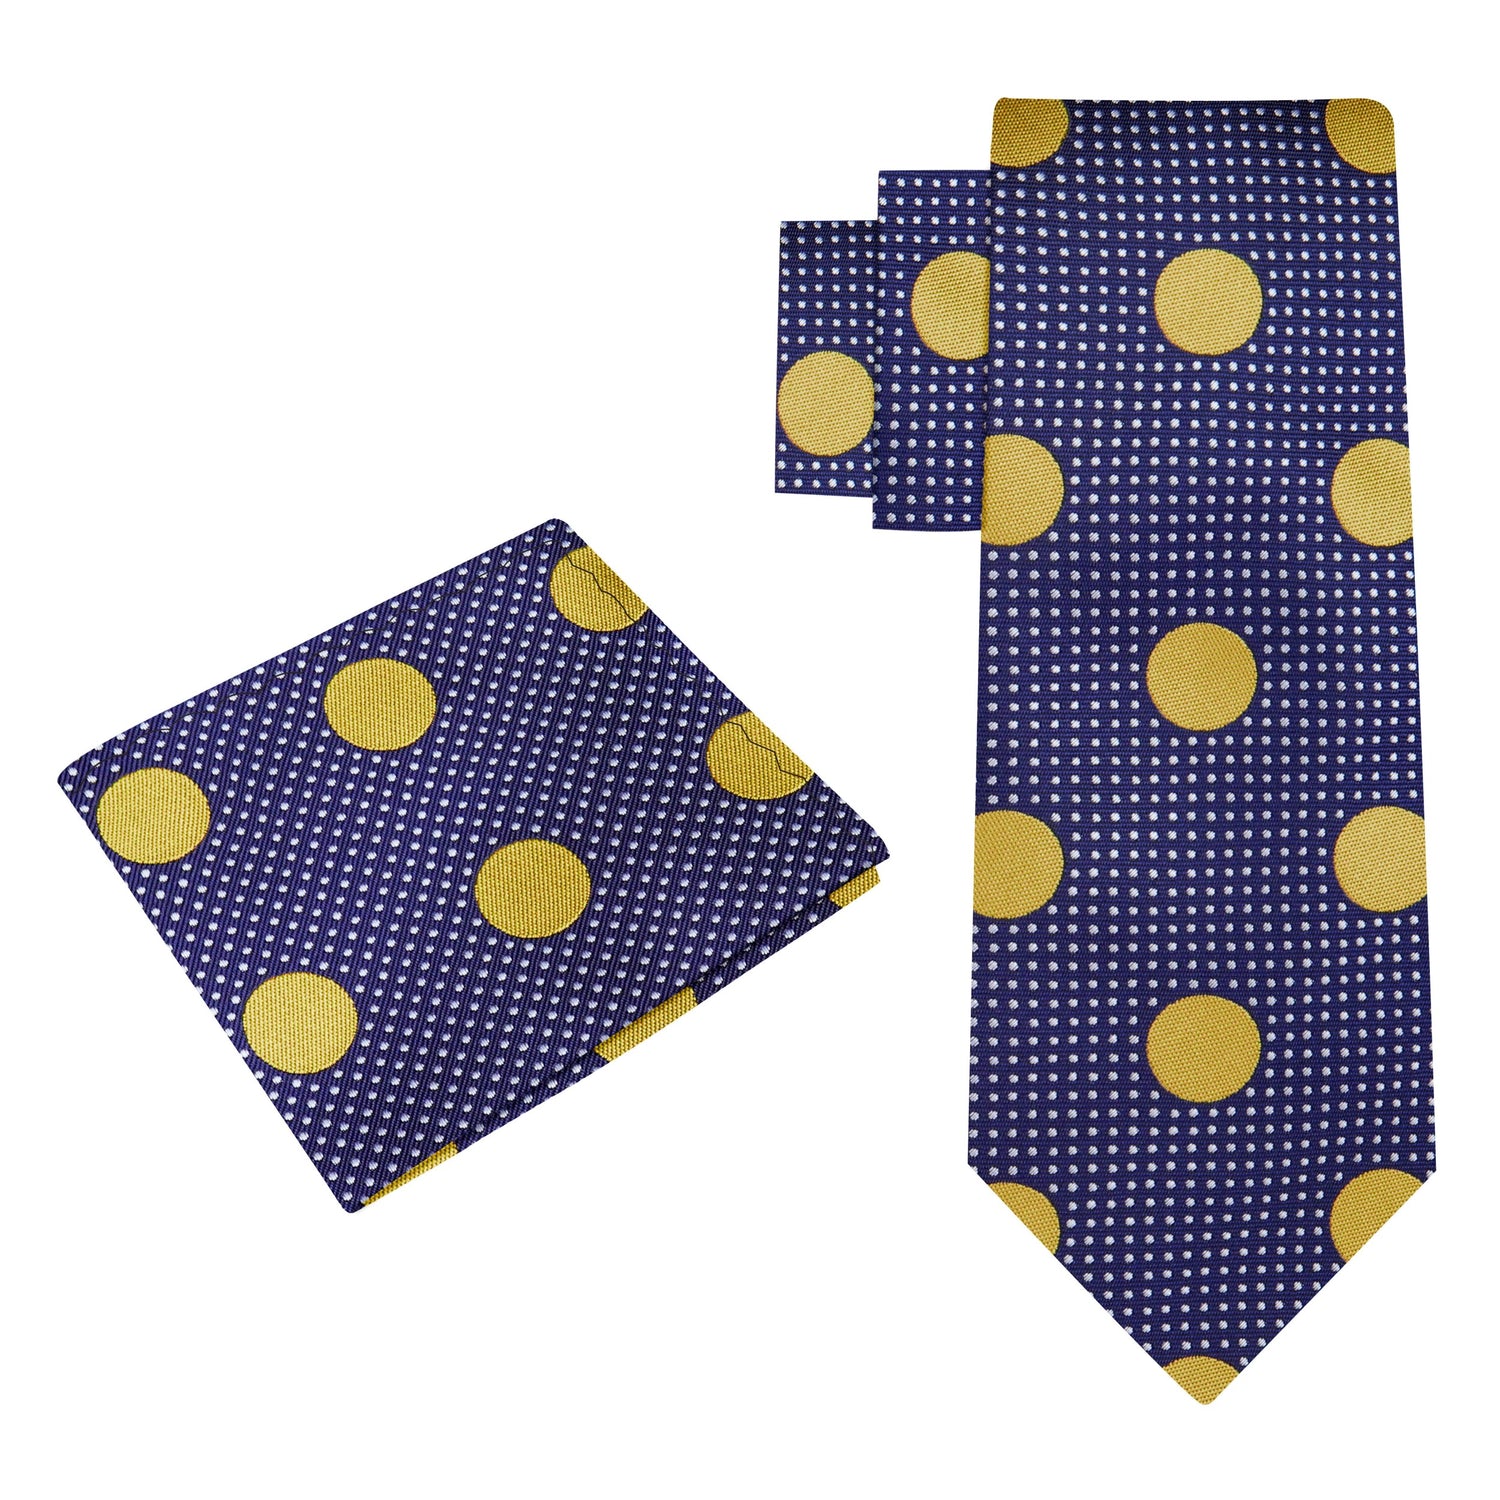 Alt view: blue gold polka tie and square